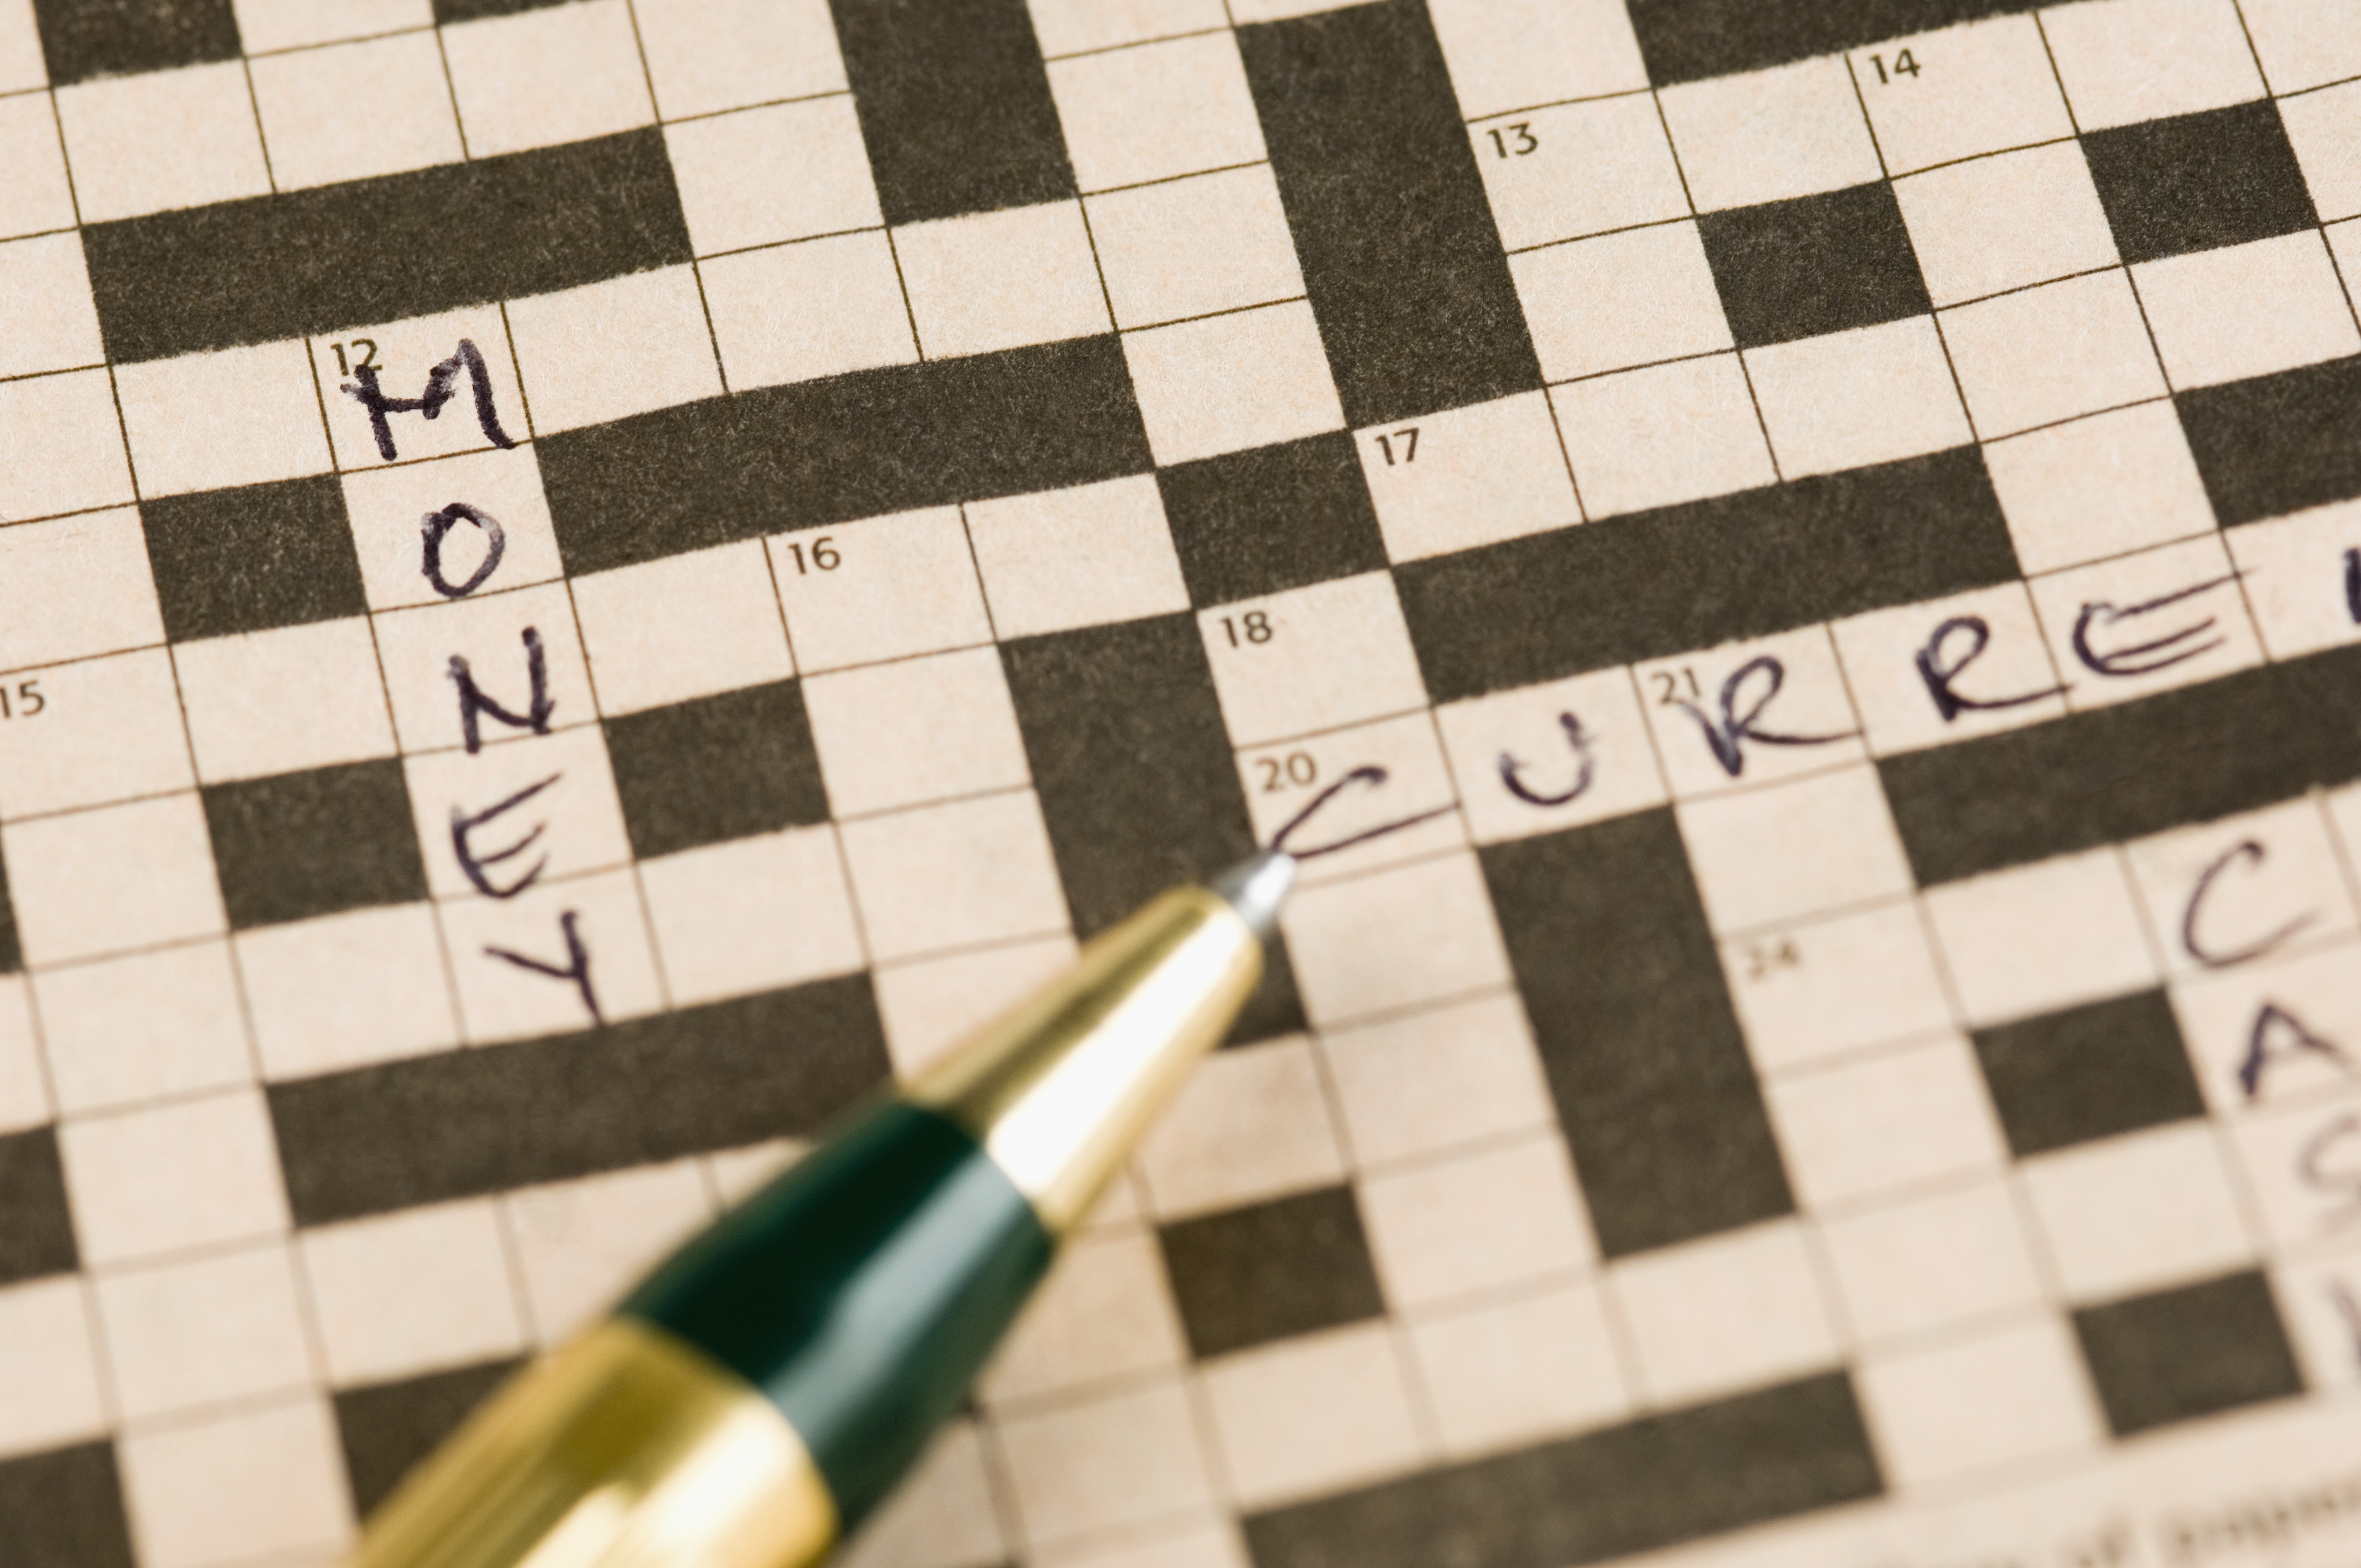 A pen poised over a crossword puzzle missing most answers aside from the word "money".